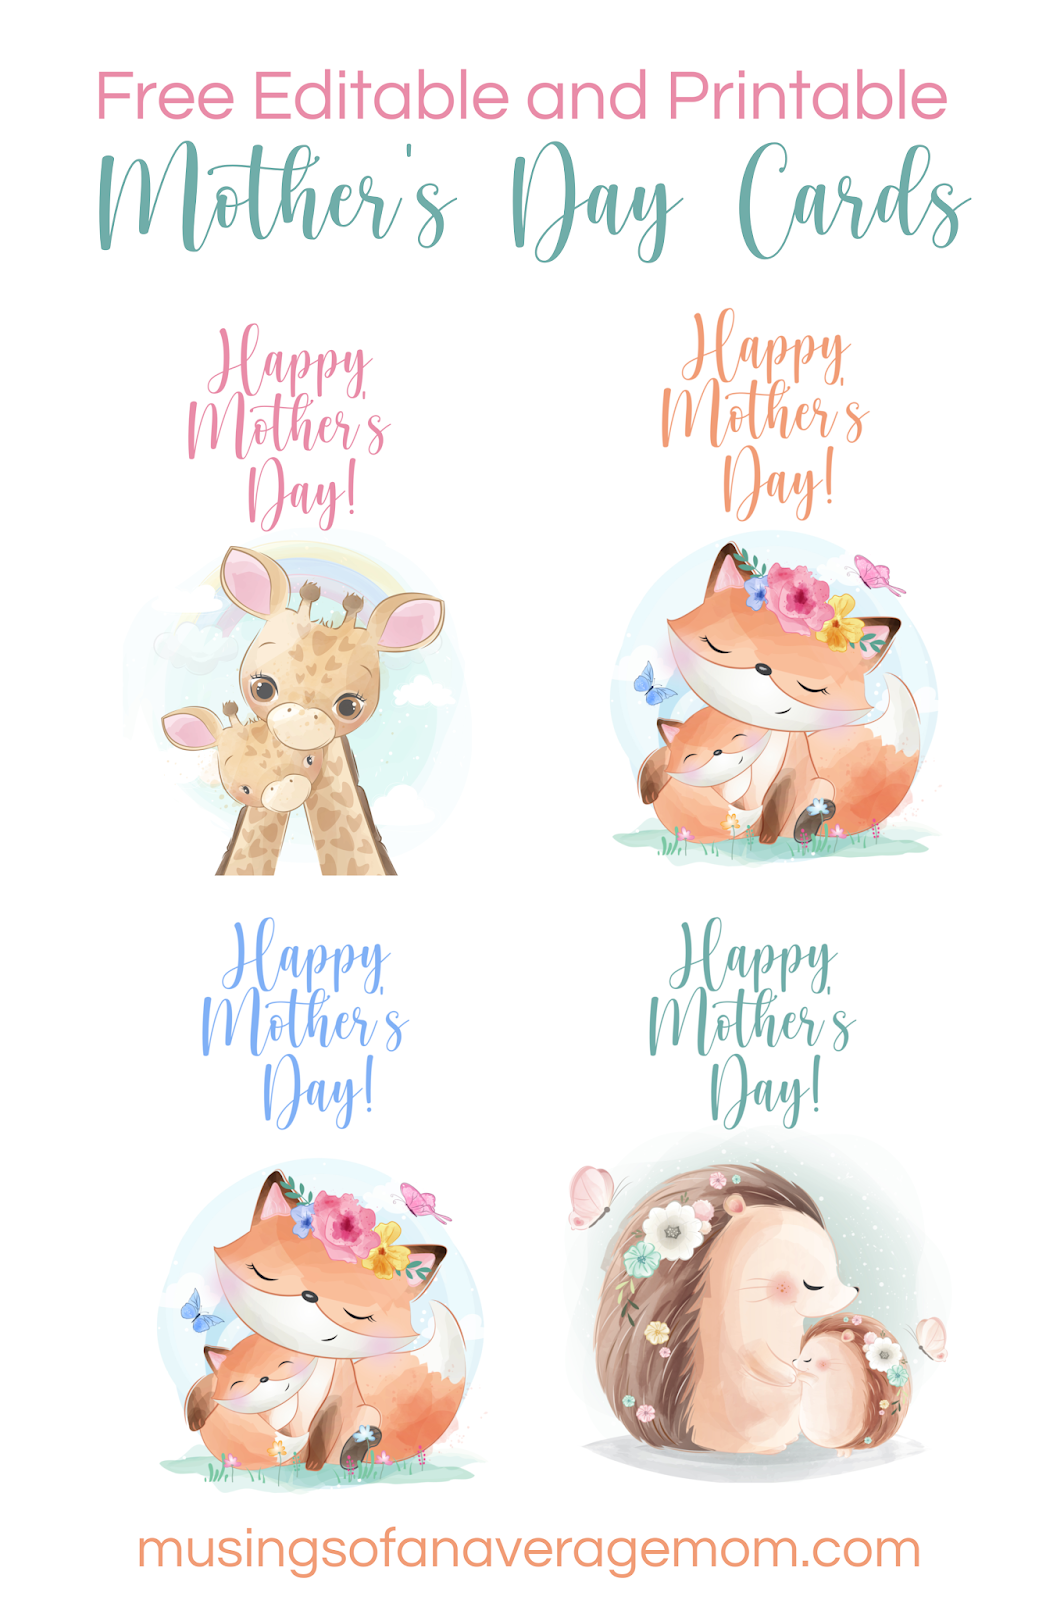 musings-of-an-average-mom-watercolor-animal-mother-s-day-cards